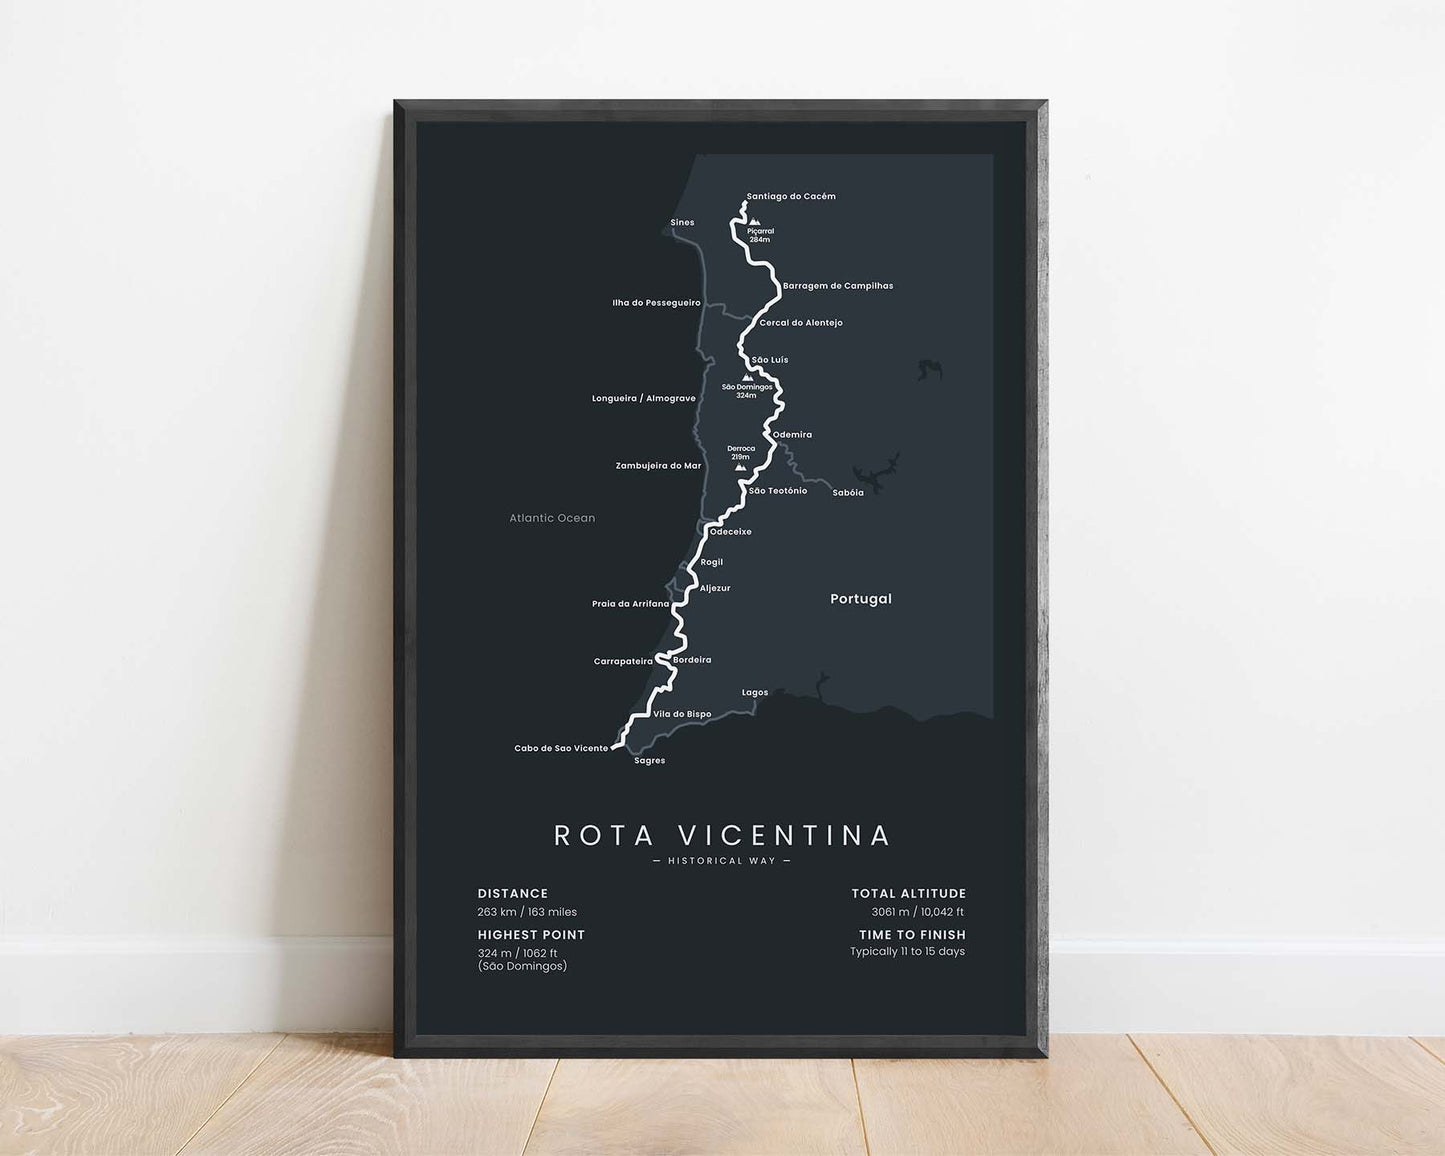 Rota Vicentina Historical Way (Cabo de Sao Vicente) Route Wall Art with Black Background